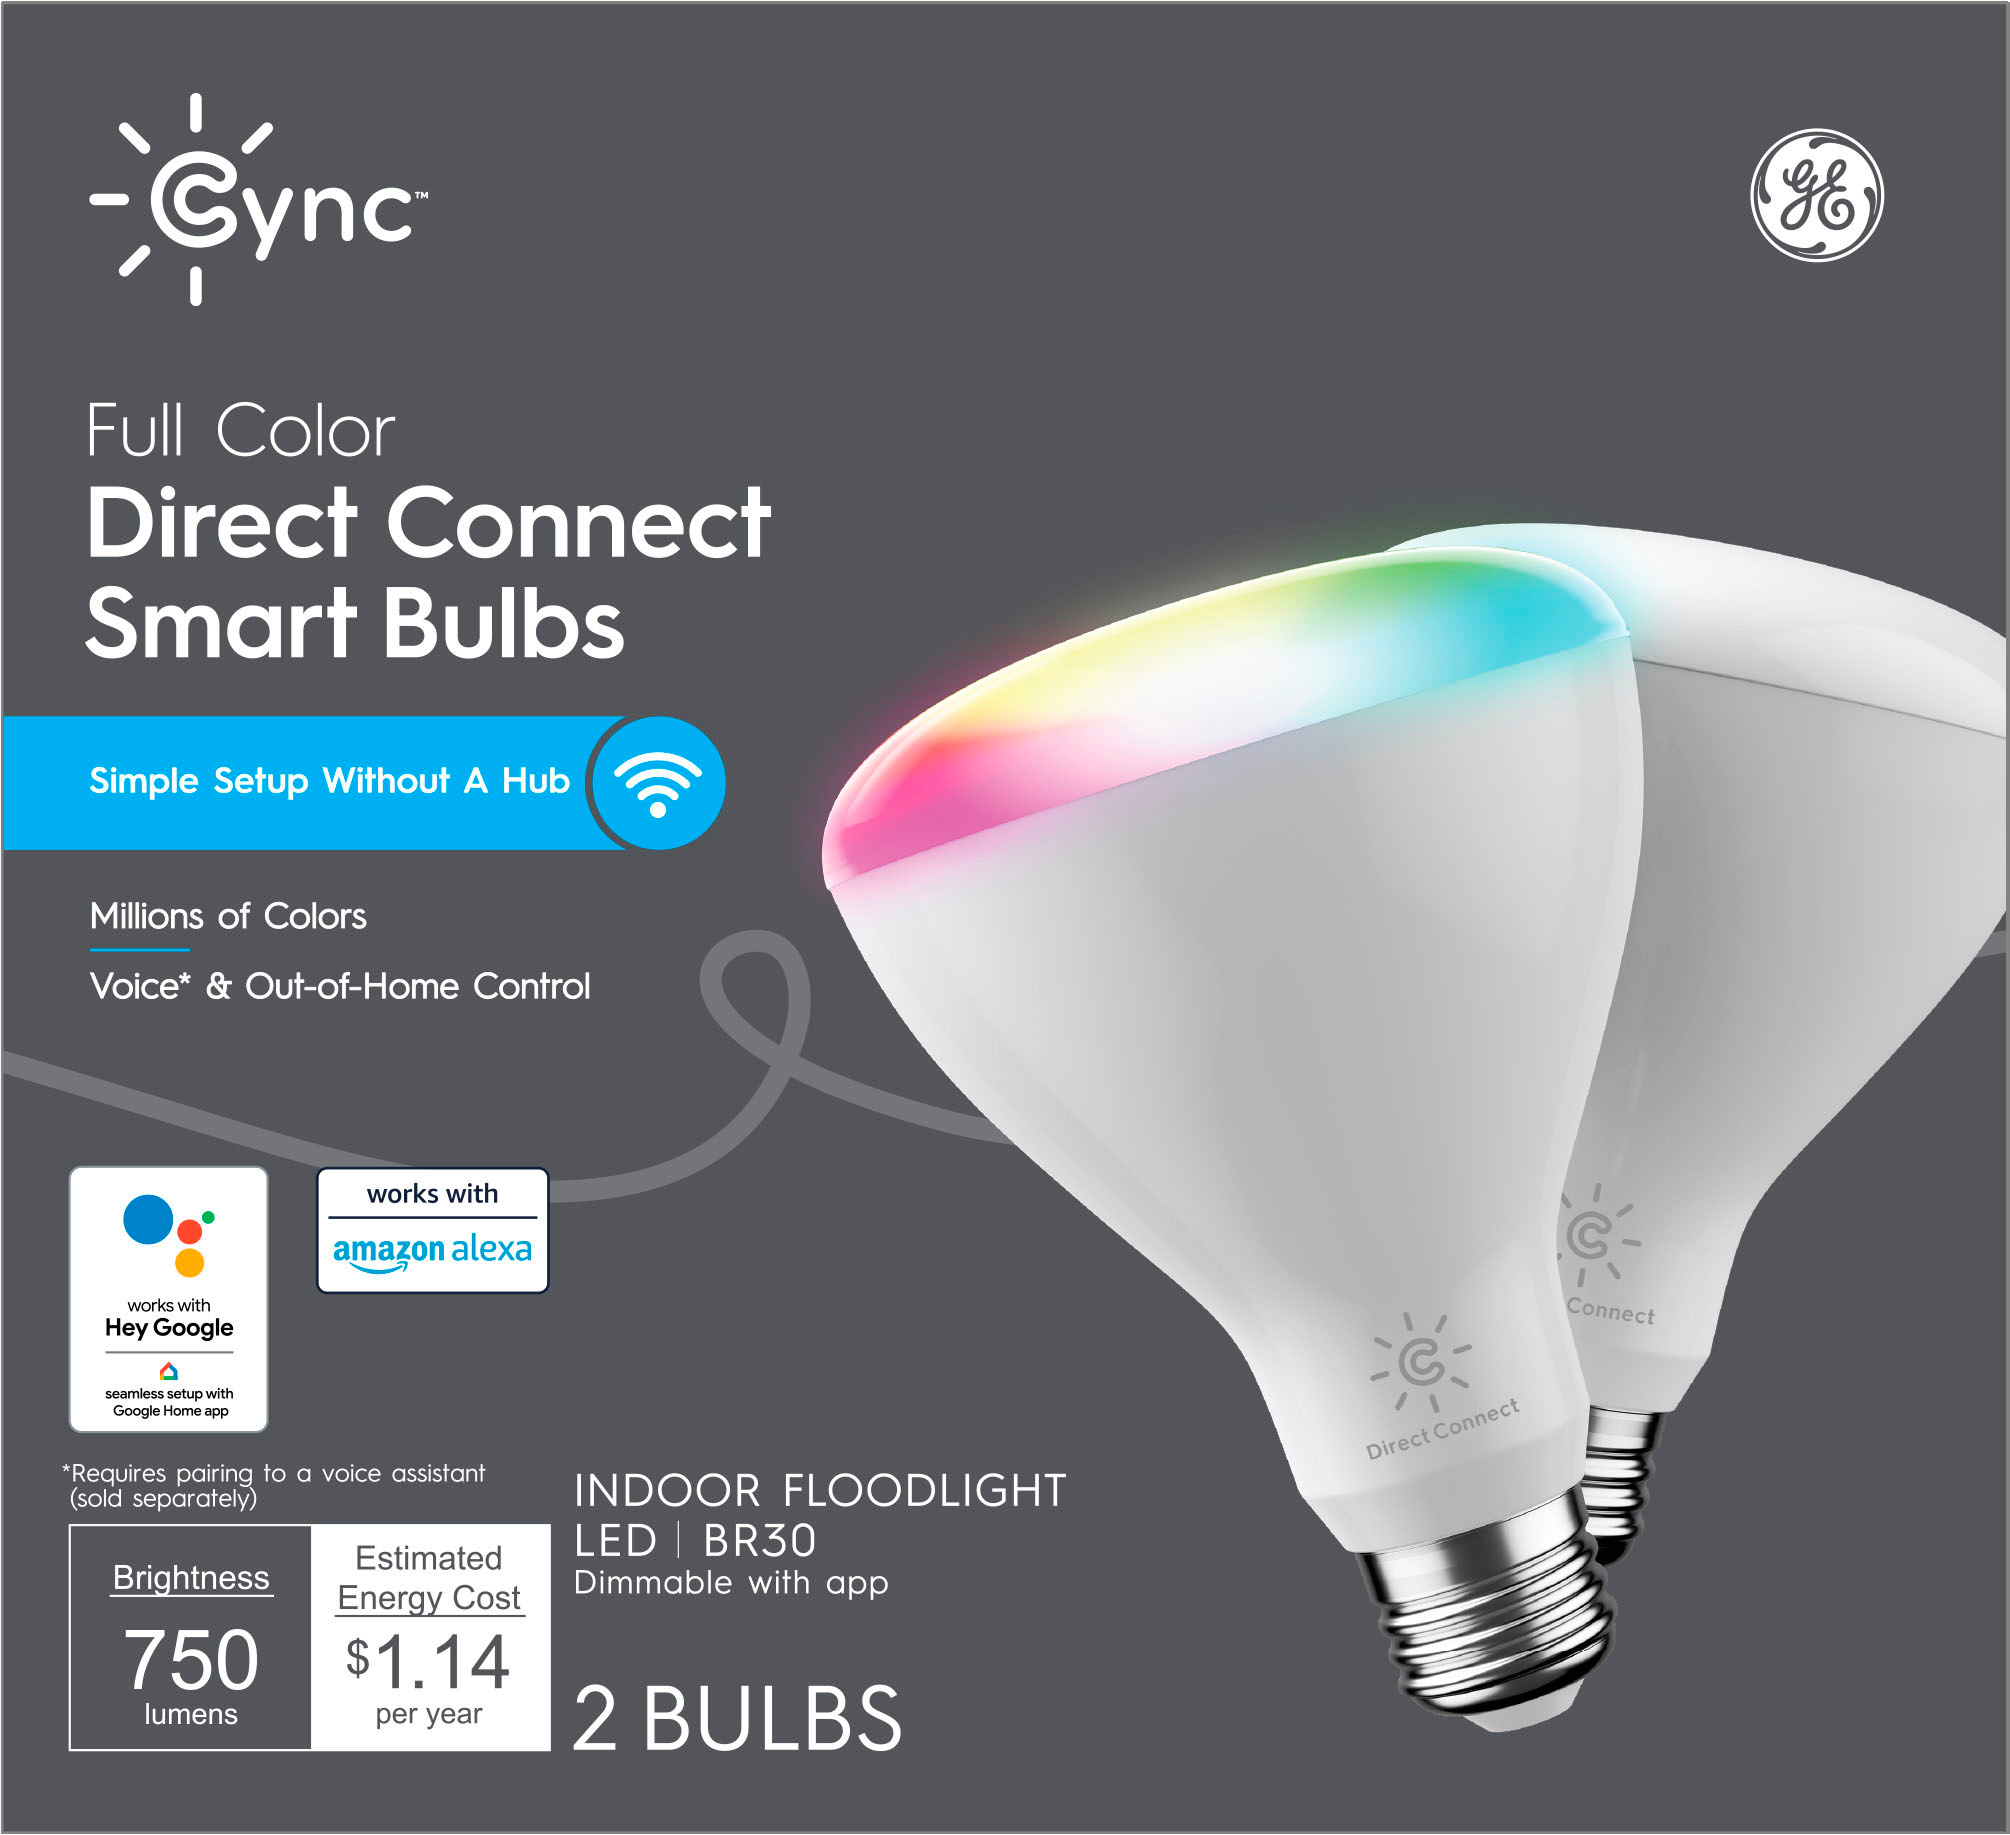 relais Ja Winkelcentrum GE Cync Direct Connect Light Bulbs(2 BR30 LED Color Changing Light Bulbs),  65W Replacement Full Color 93128986 - Best Buy